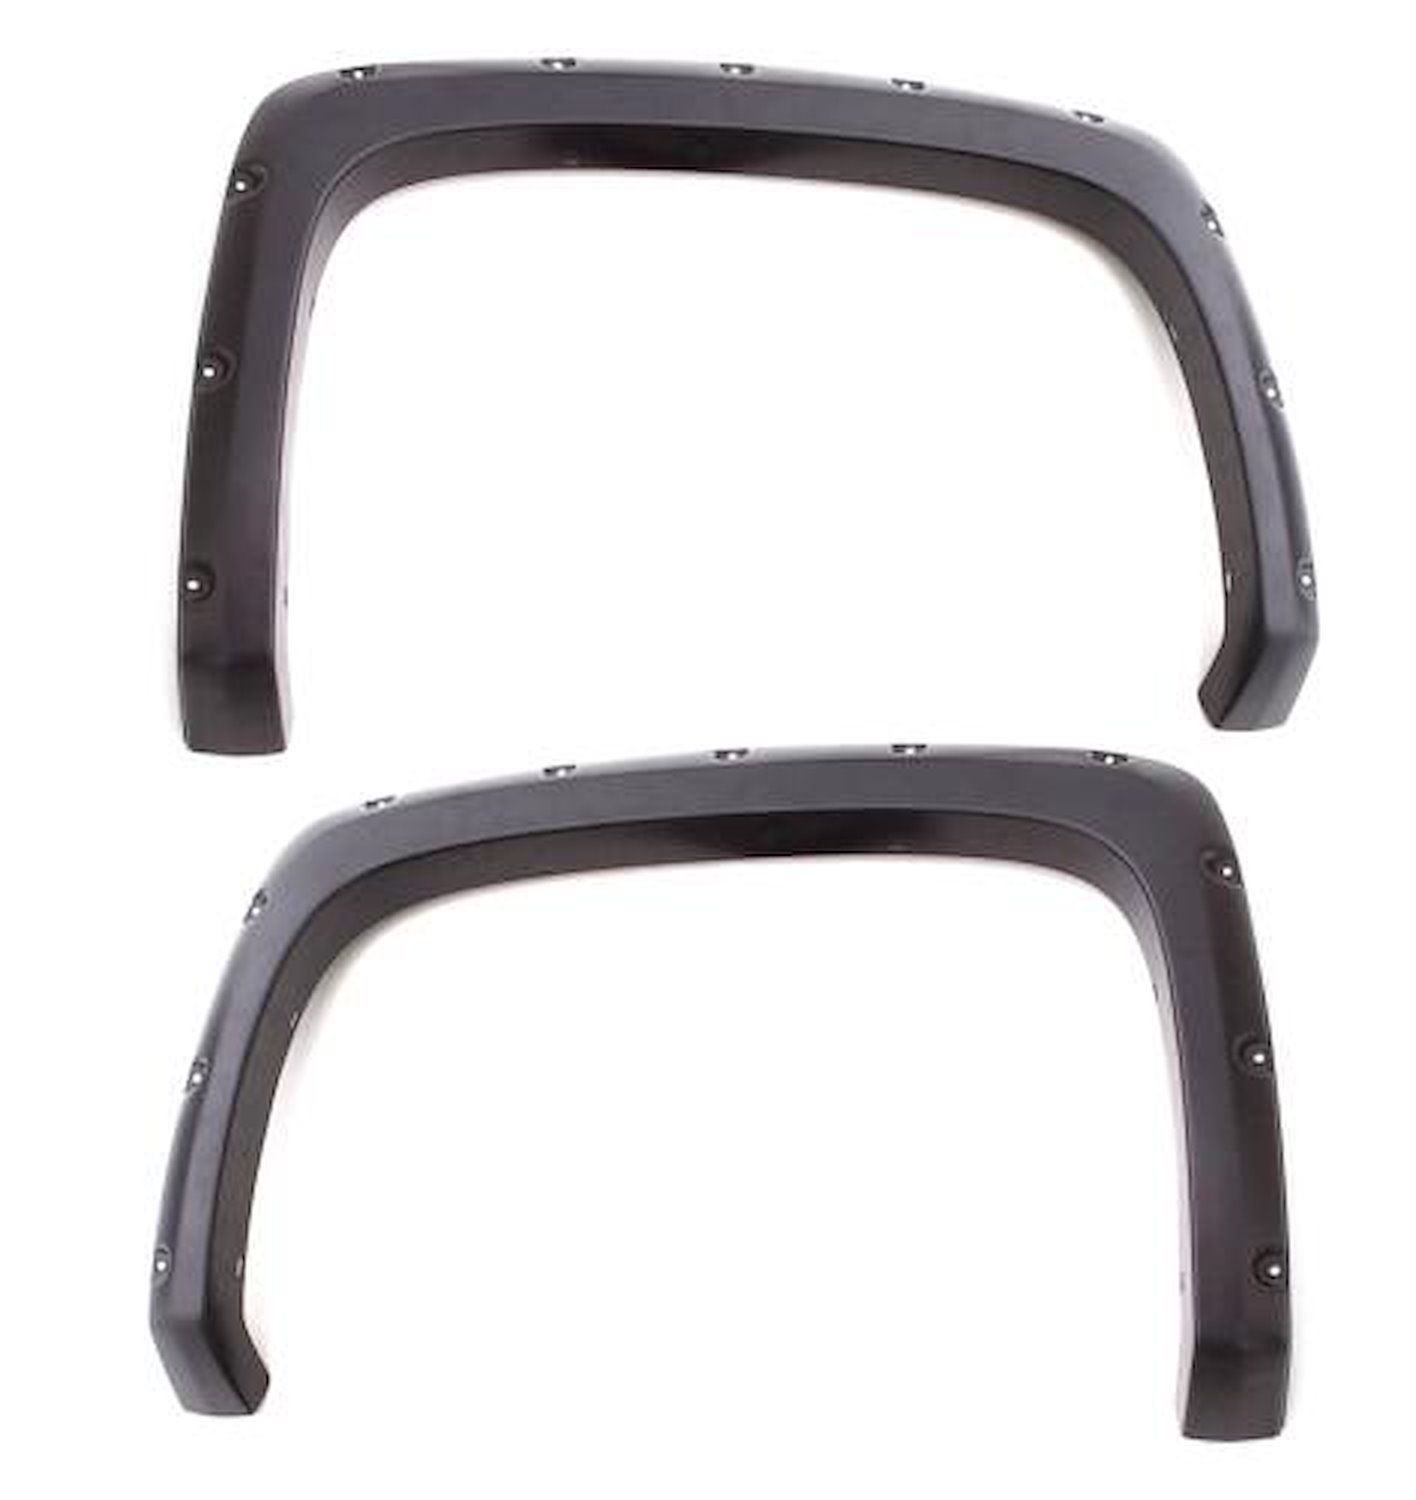 RX Rivet-Style Rear Fender Flares For Select Late-Model